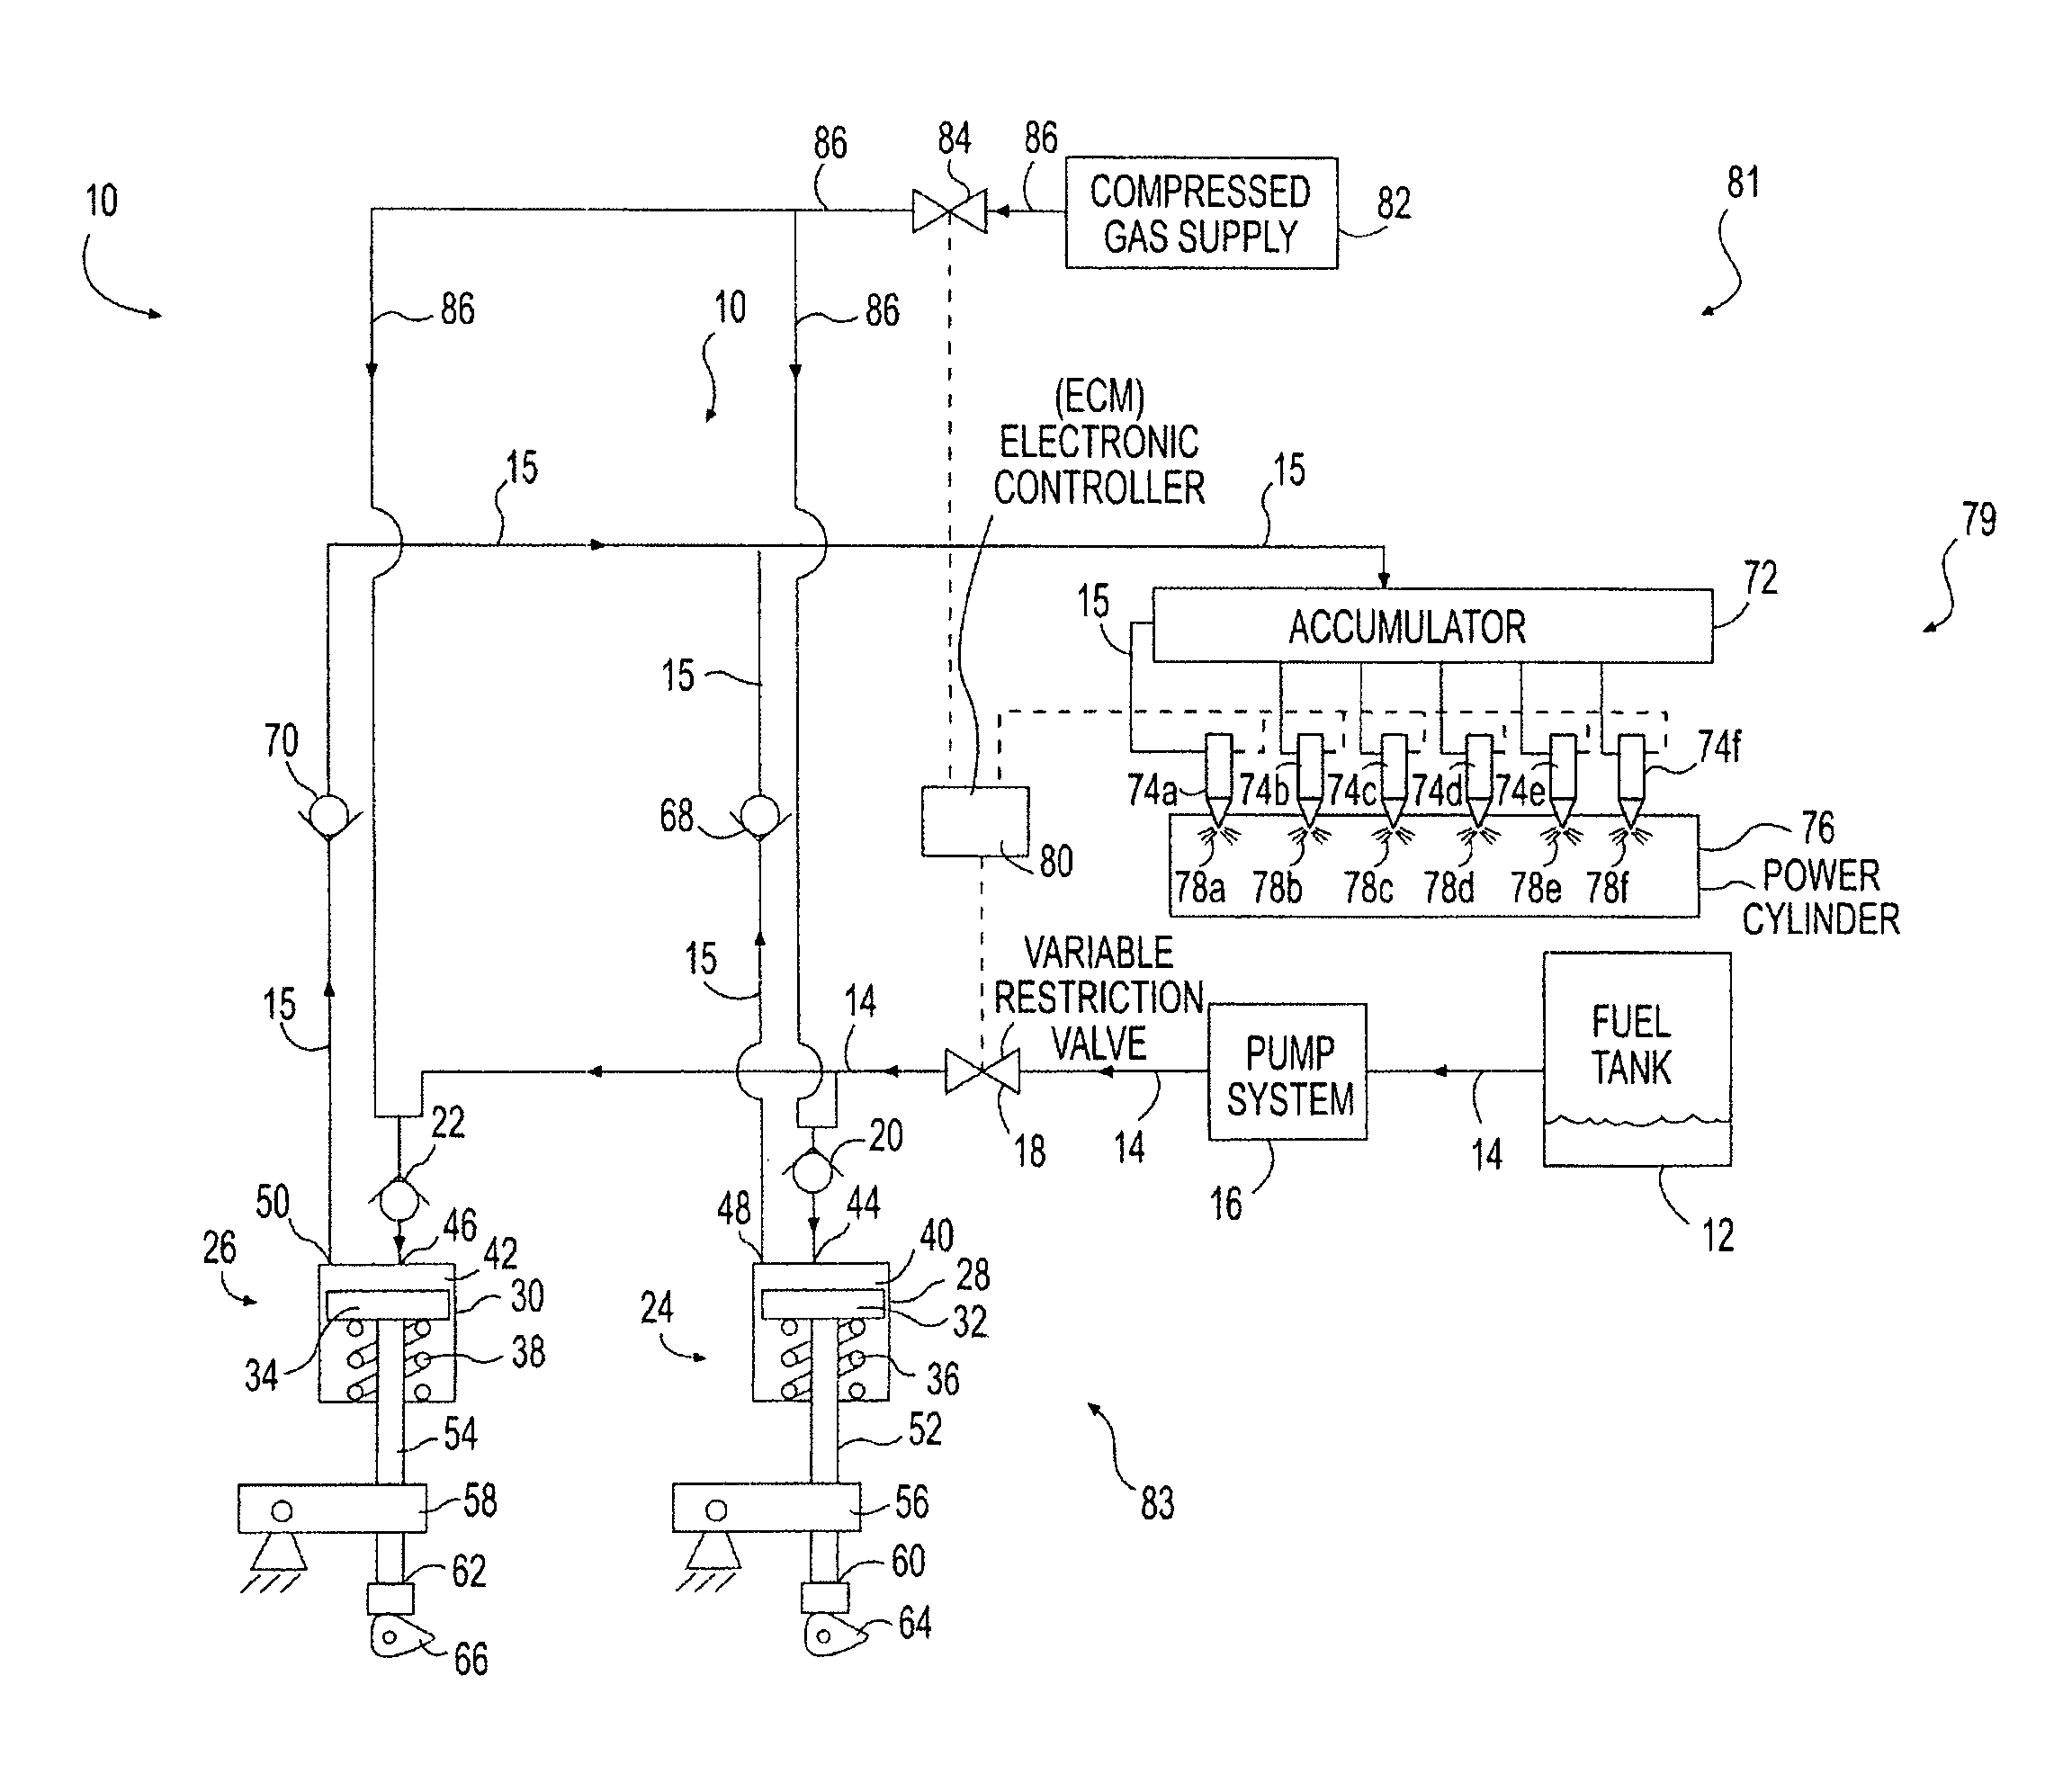 High pressure common rail fuel system with gas injection